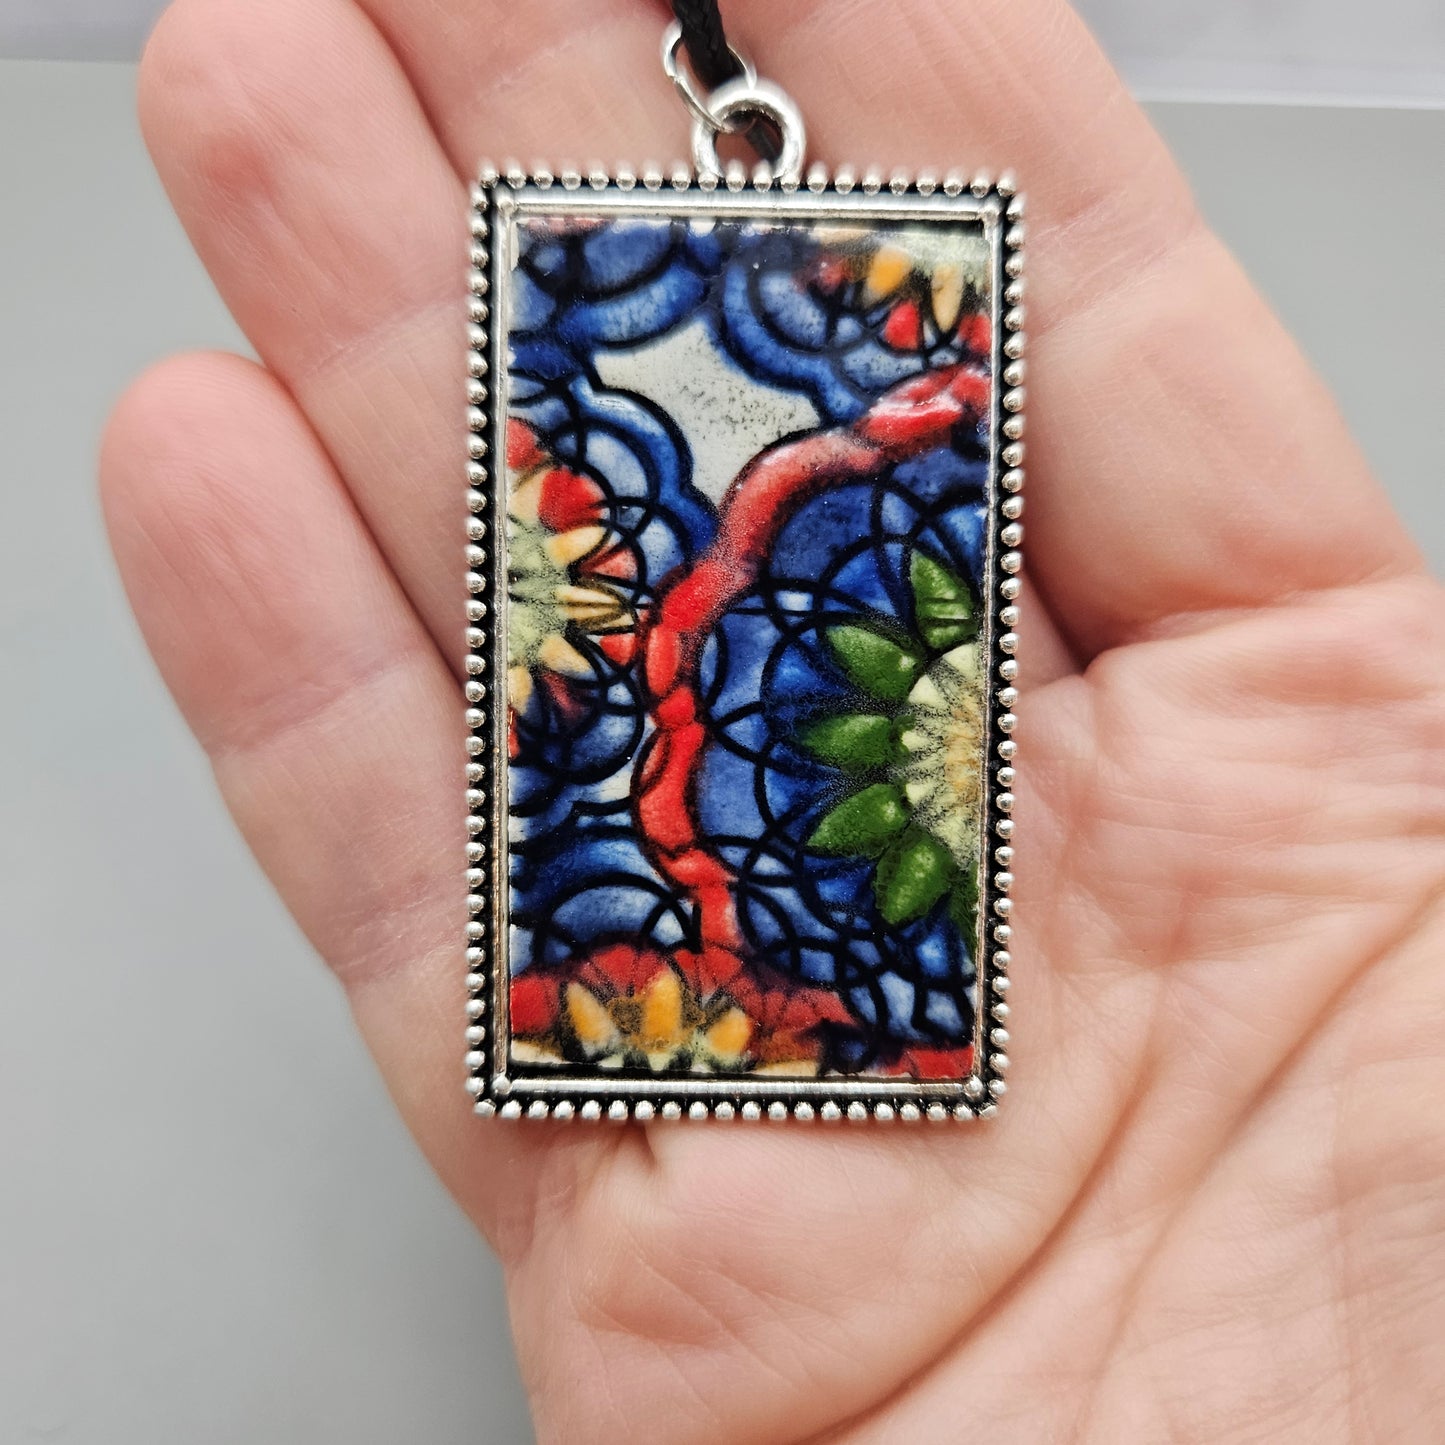 2 inch by 1 inch rectangle pendants with metal frame